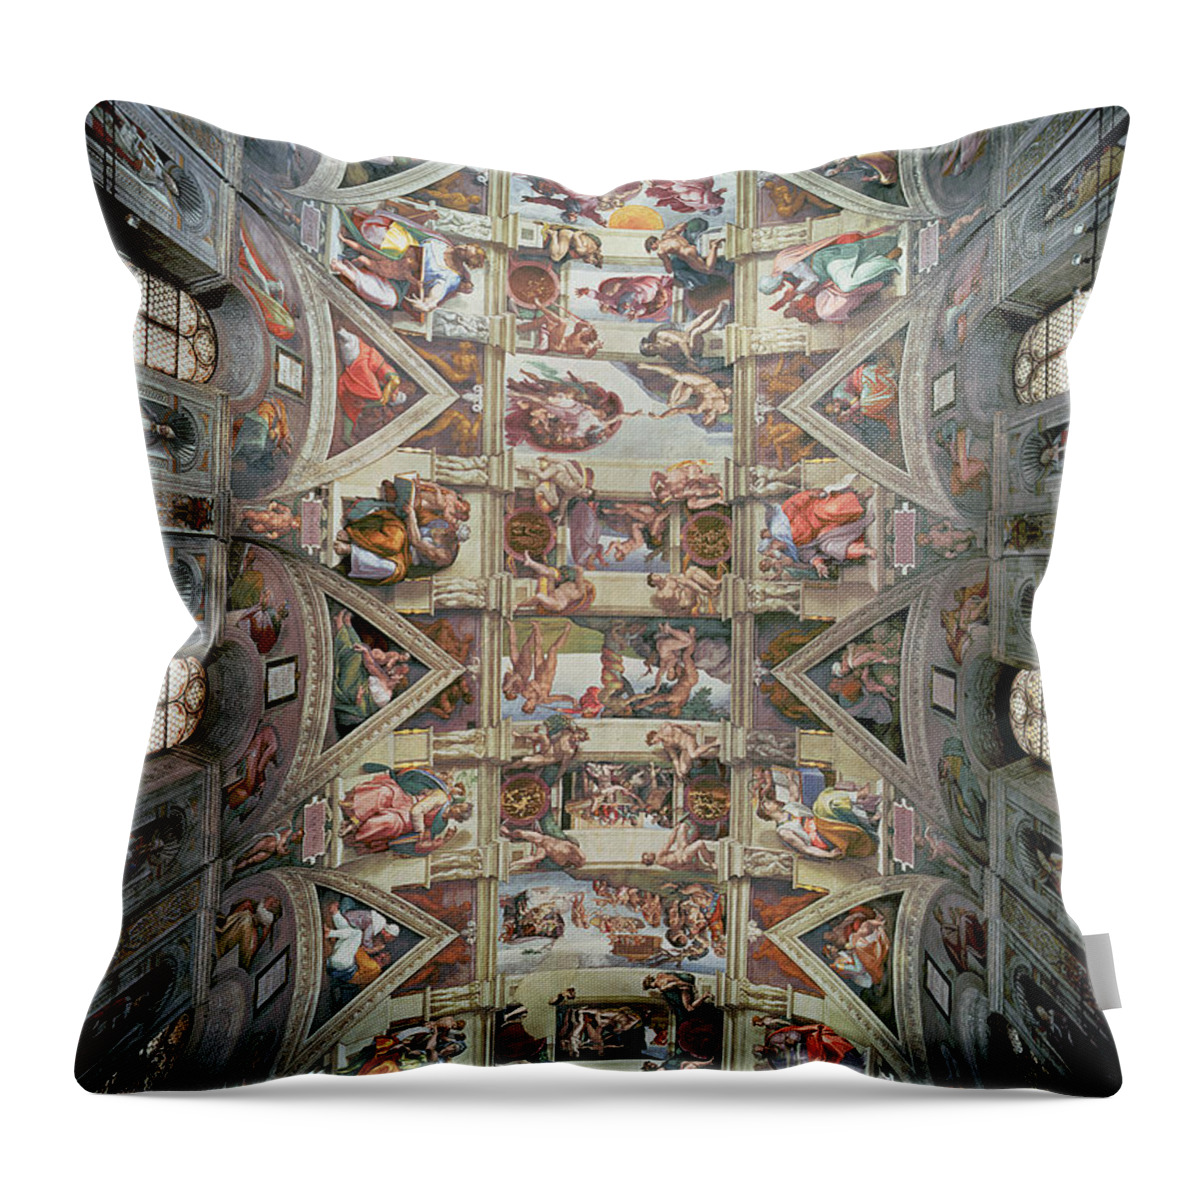 Sistine Throw Pillow featuring the painting Sistine Chapel Ceiling by Michelangelo